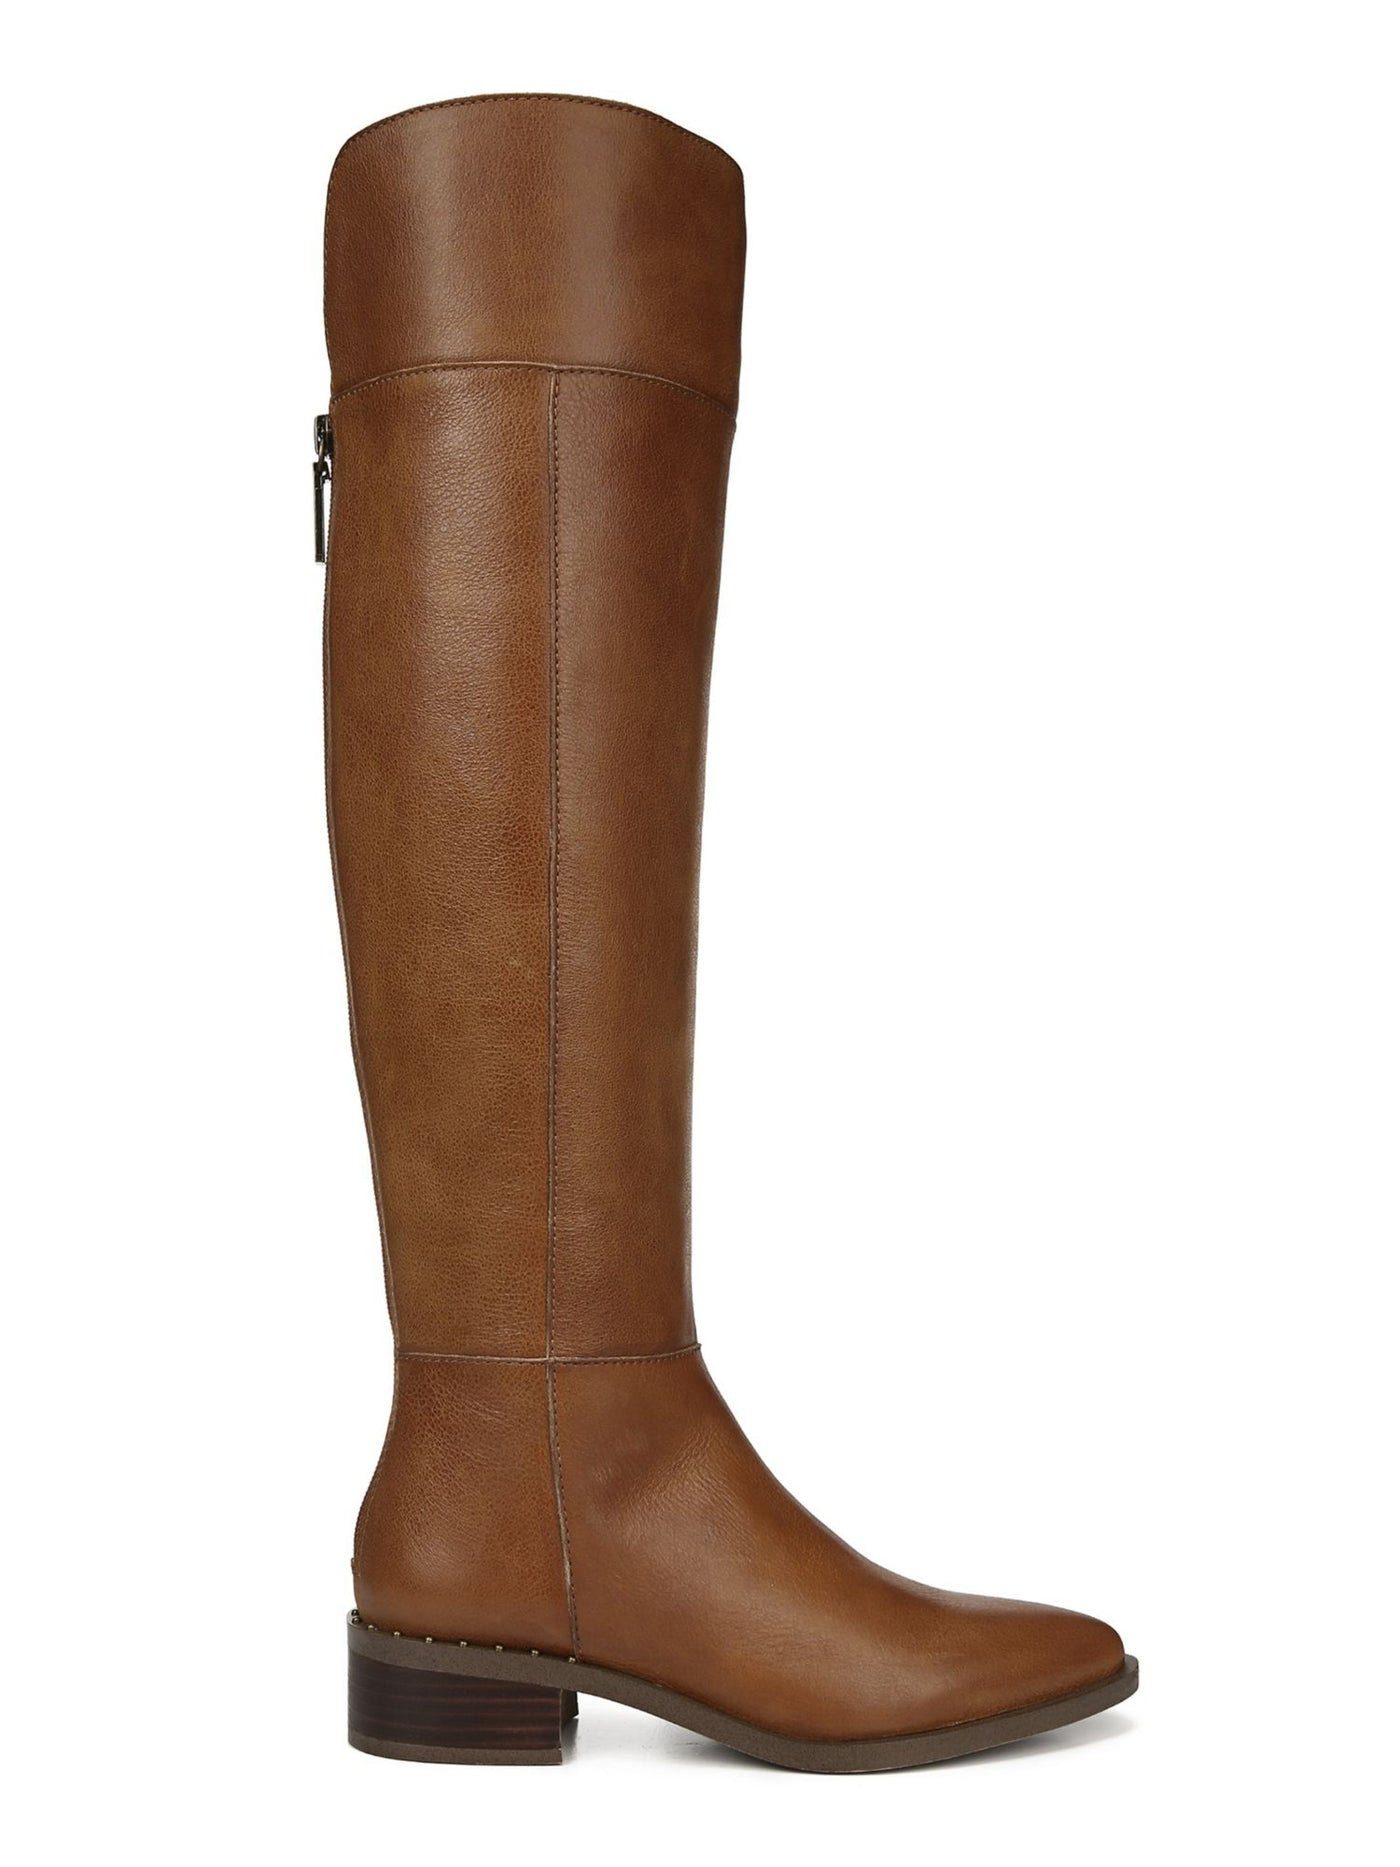 FRANCO SARTO Womens Brown Bead-Link Trim At Welt Round Toe Stacked Heel Zip-Up Leather Boots Shoes 7.5